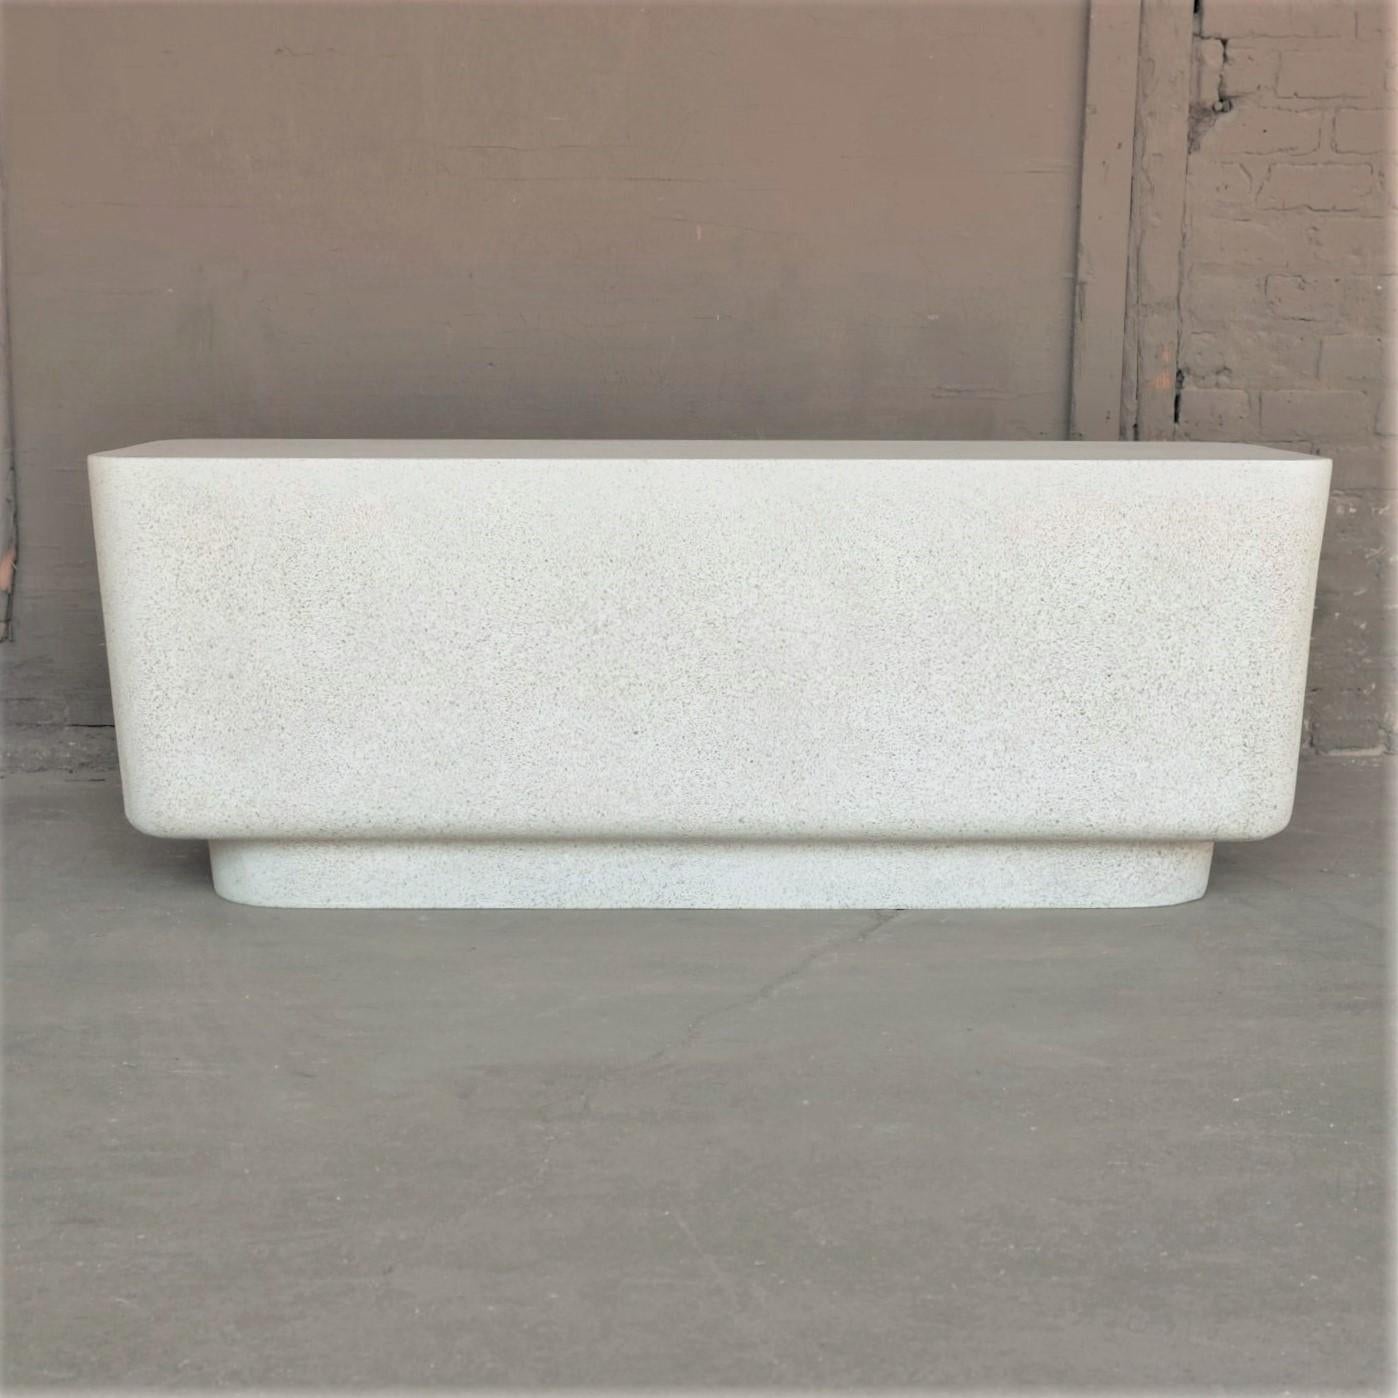 The block bench is pictured in our natural stone finish. The texture and modern look of concrete make it appropriate for a wide variety of styles and spaces.

Dimensions: Width 48 in. (122 cm), depth 18 in. (45.7 cm), height 18 in. (45.7 cm). Weight